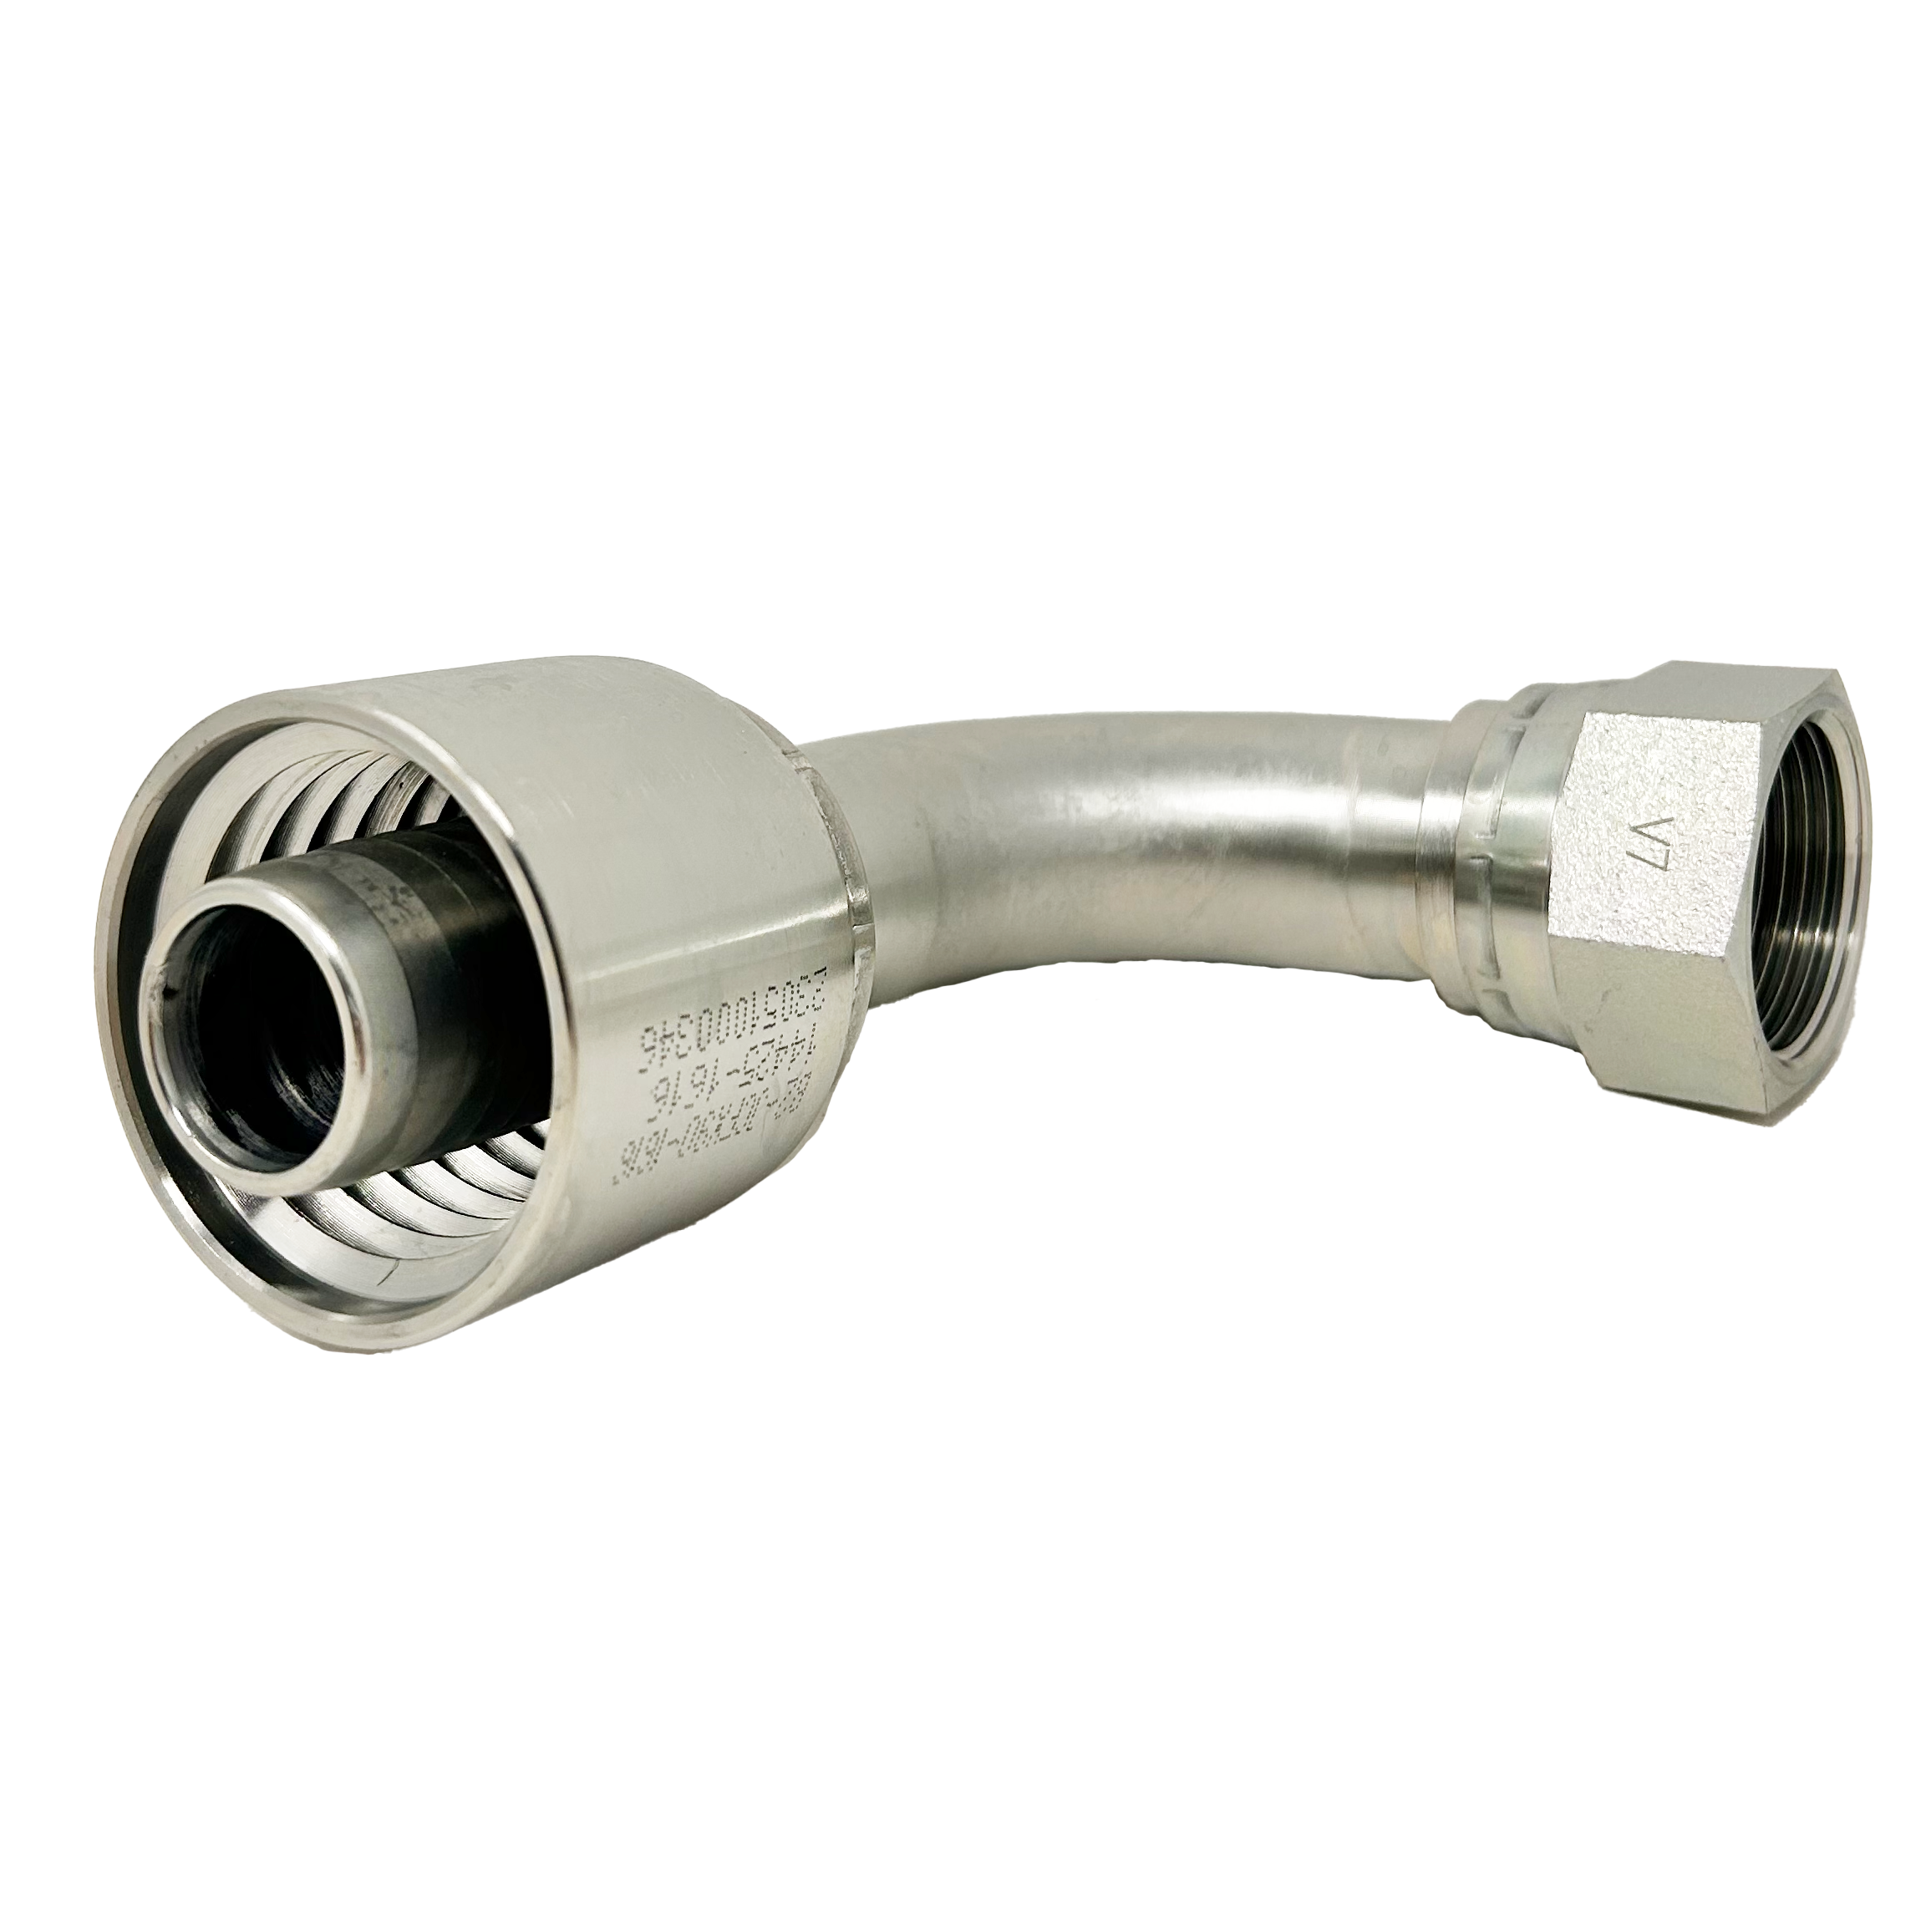 B2-JCFX90-2020: Continental Hose Fitting, 1.25 (1-1/4") Hose ID x 1-5/8-12 Female JIC, 90-Degree Swivel Connection